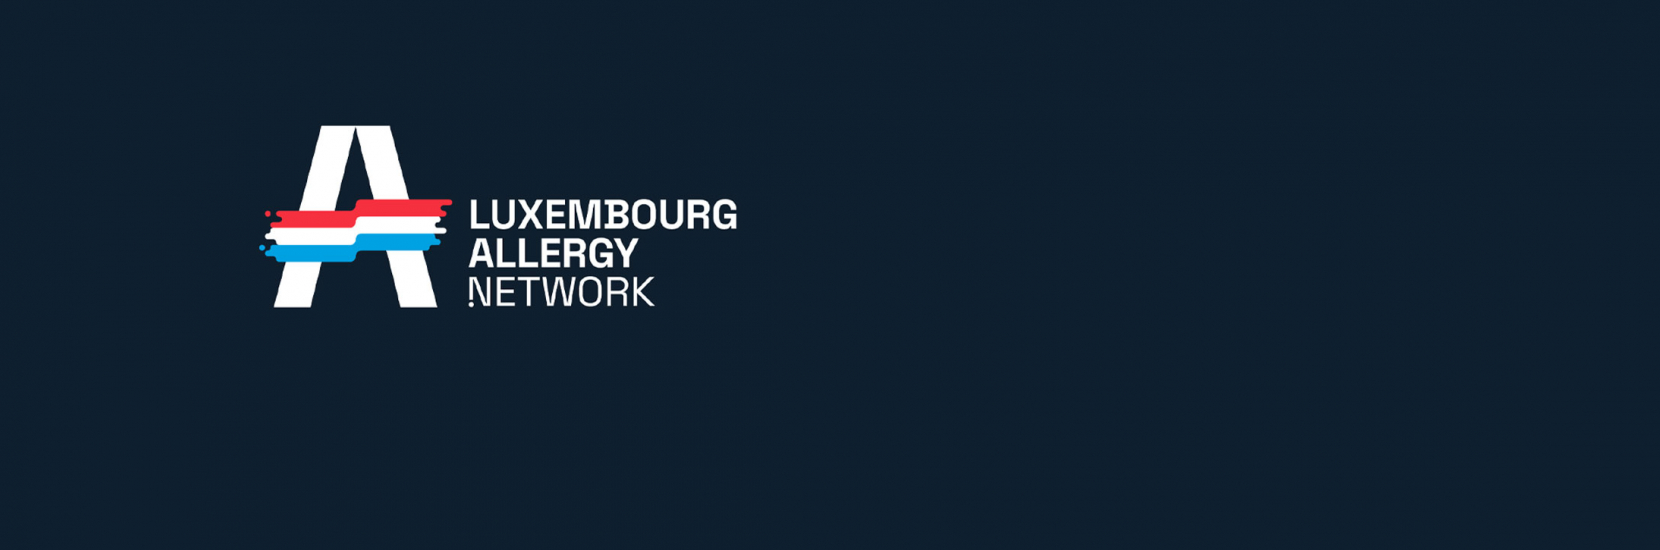 LAN - Luxembourg Allergy Network